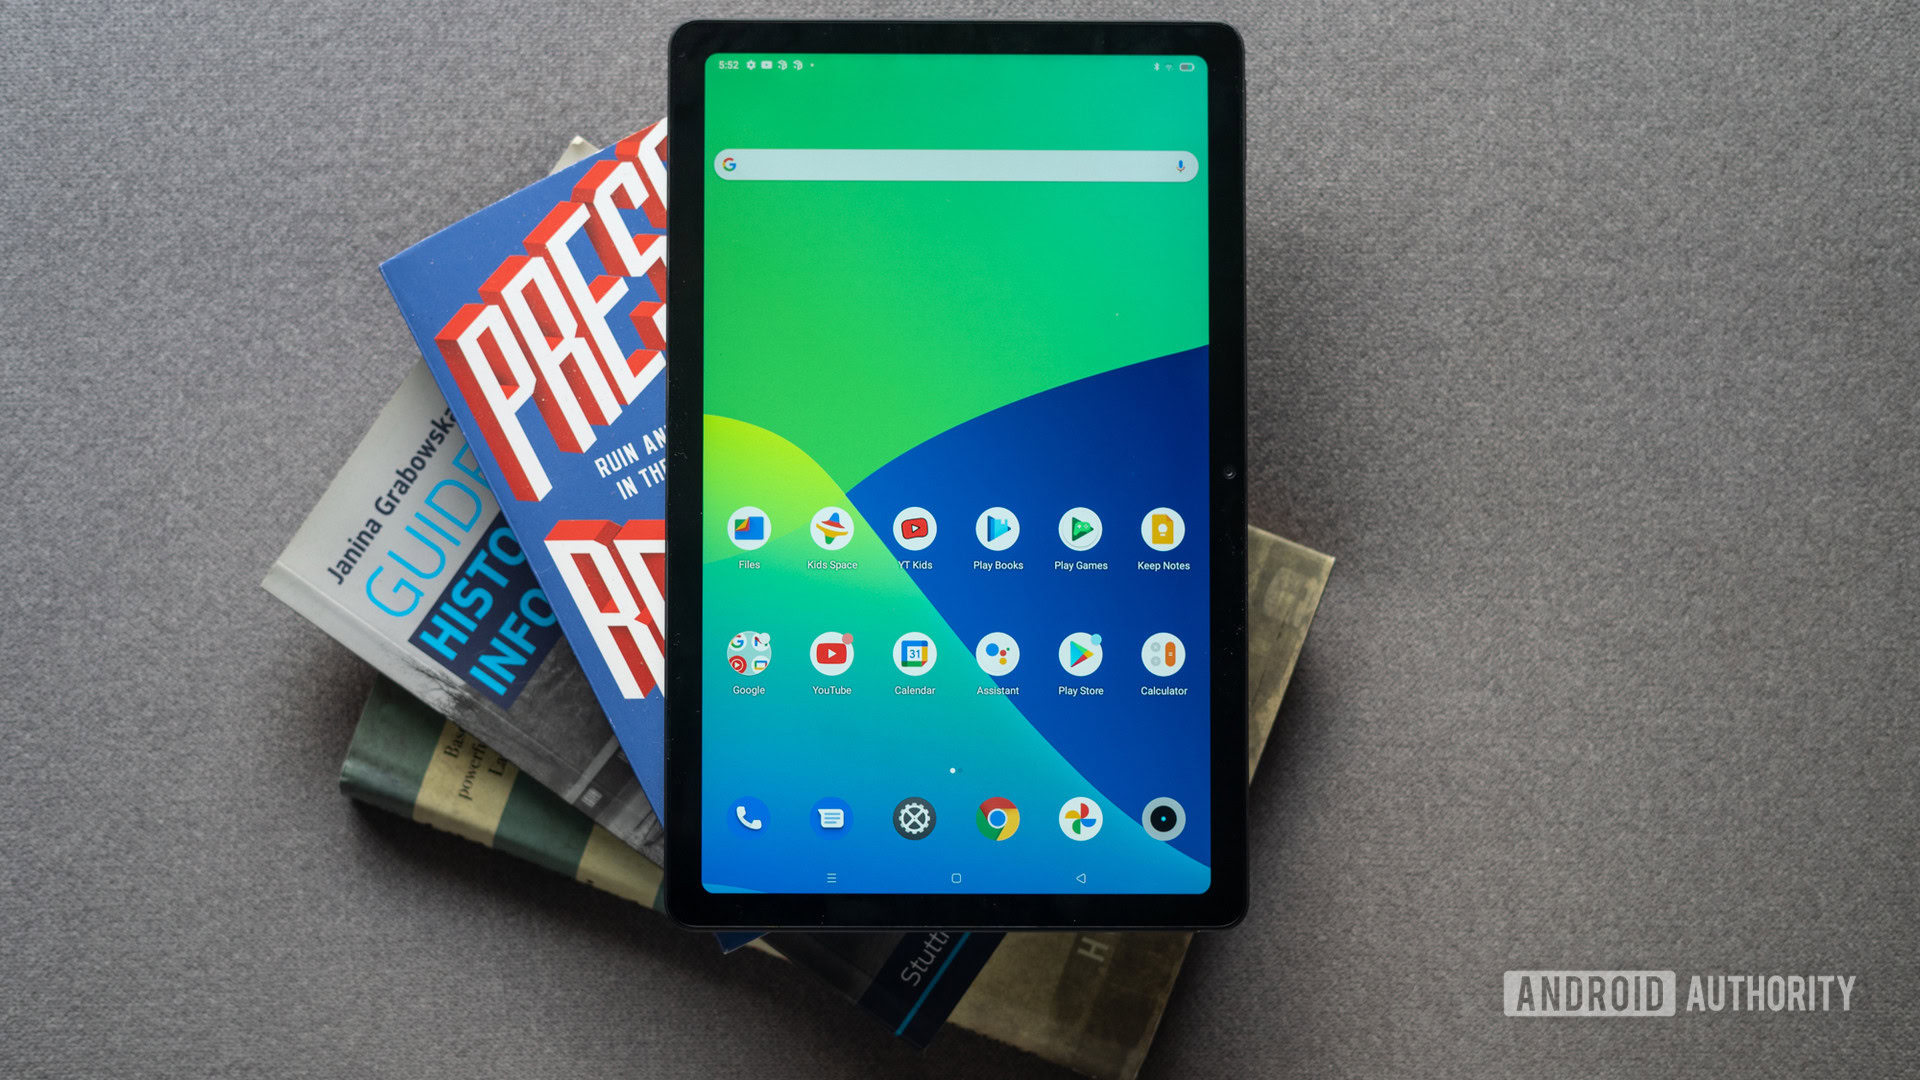 https://www.androidauthority.com/wp-content/uploads/2021/09/Realme-Pad-tablet-review-top-down-view-of-the-screen.jpg